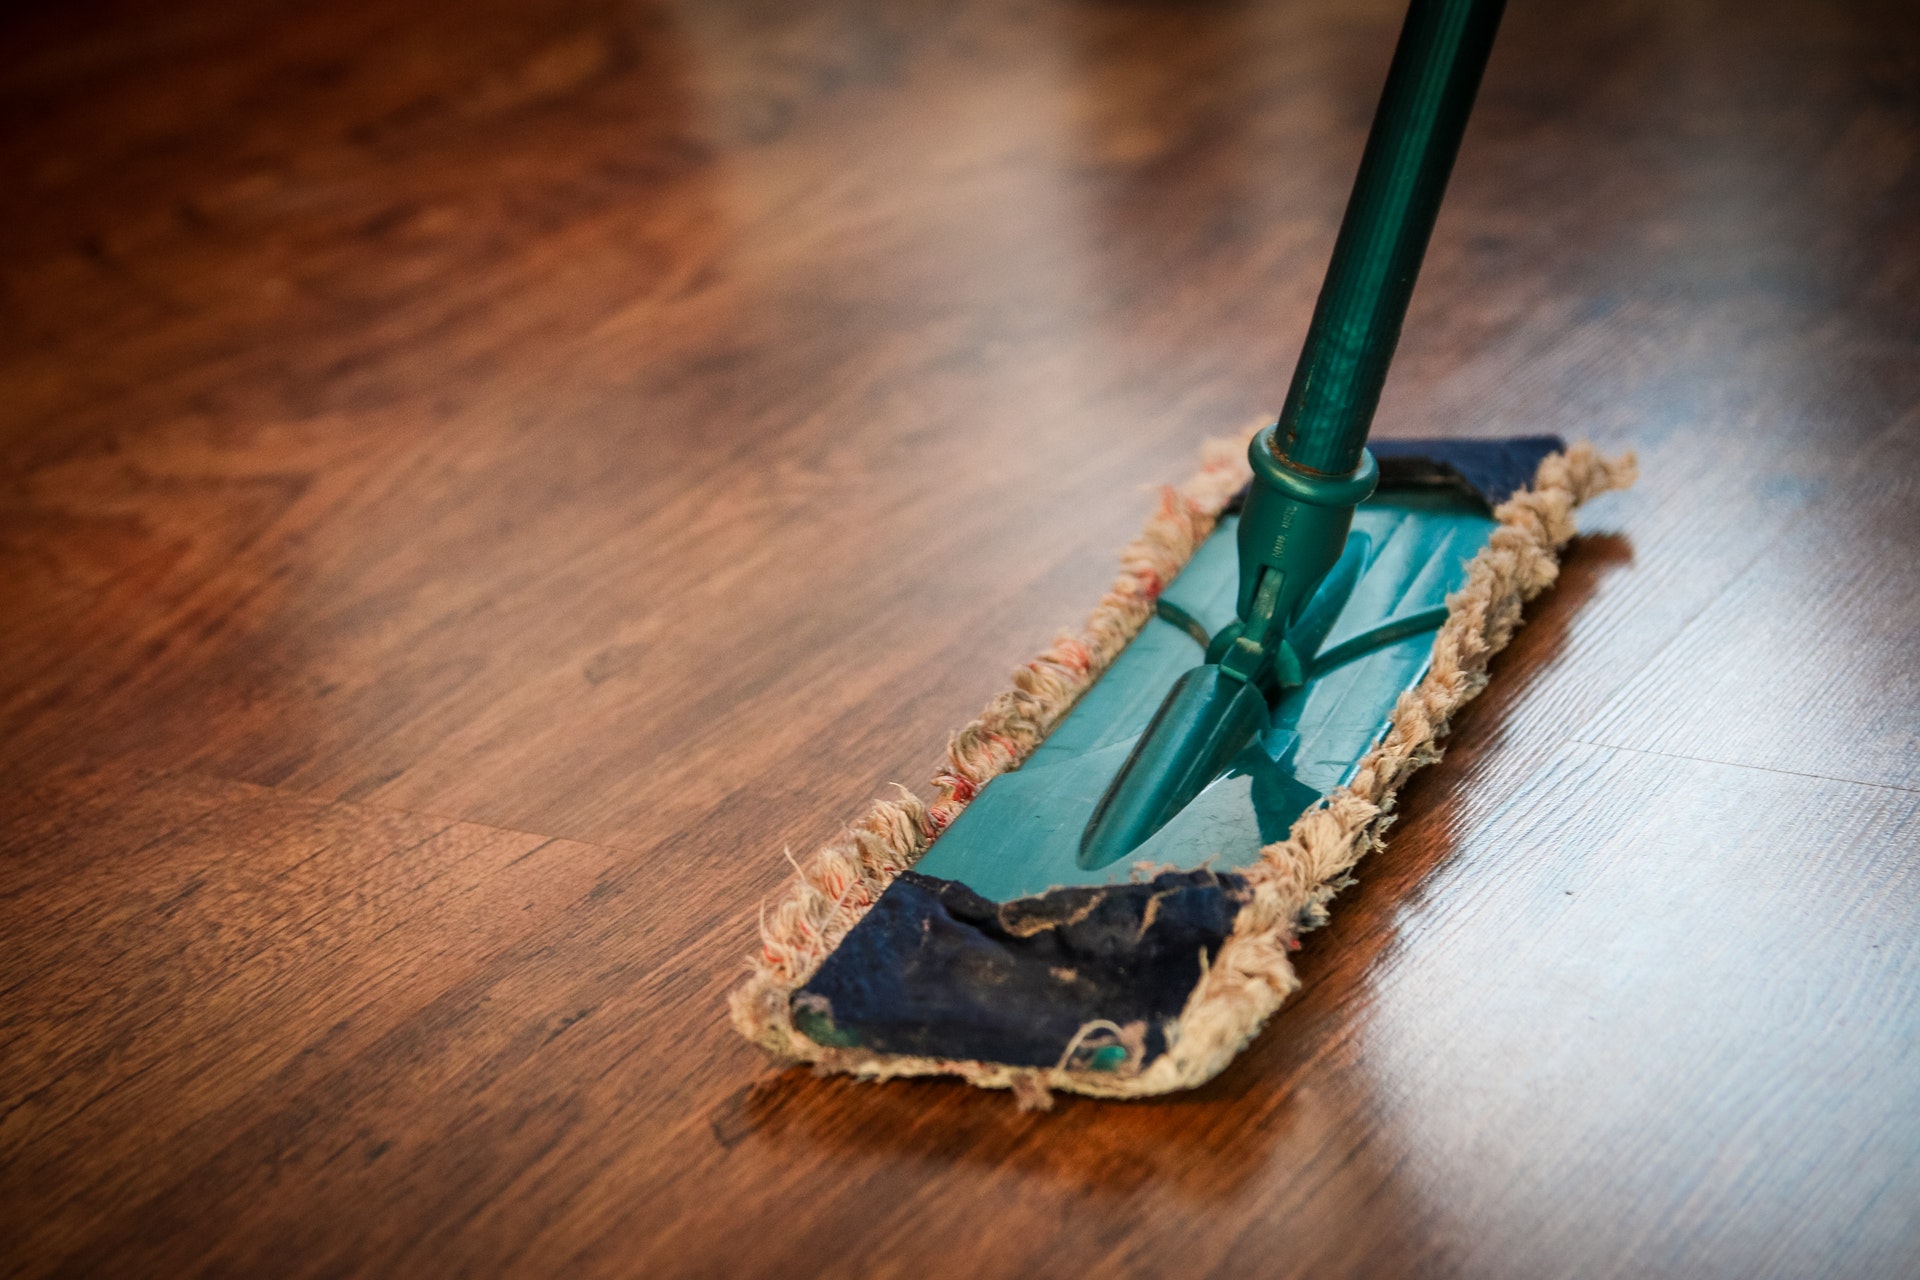 Tackle Cleaning Vinyl Plank Flooring, How To Clean And Care For Vinyl Plank Flooring